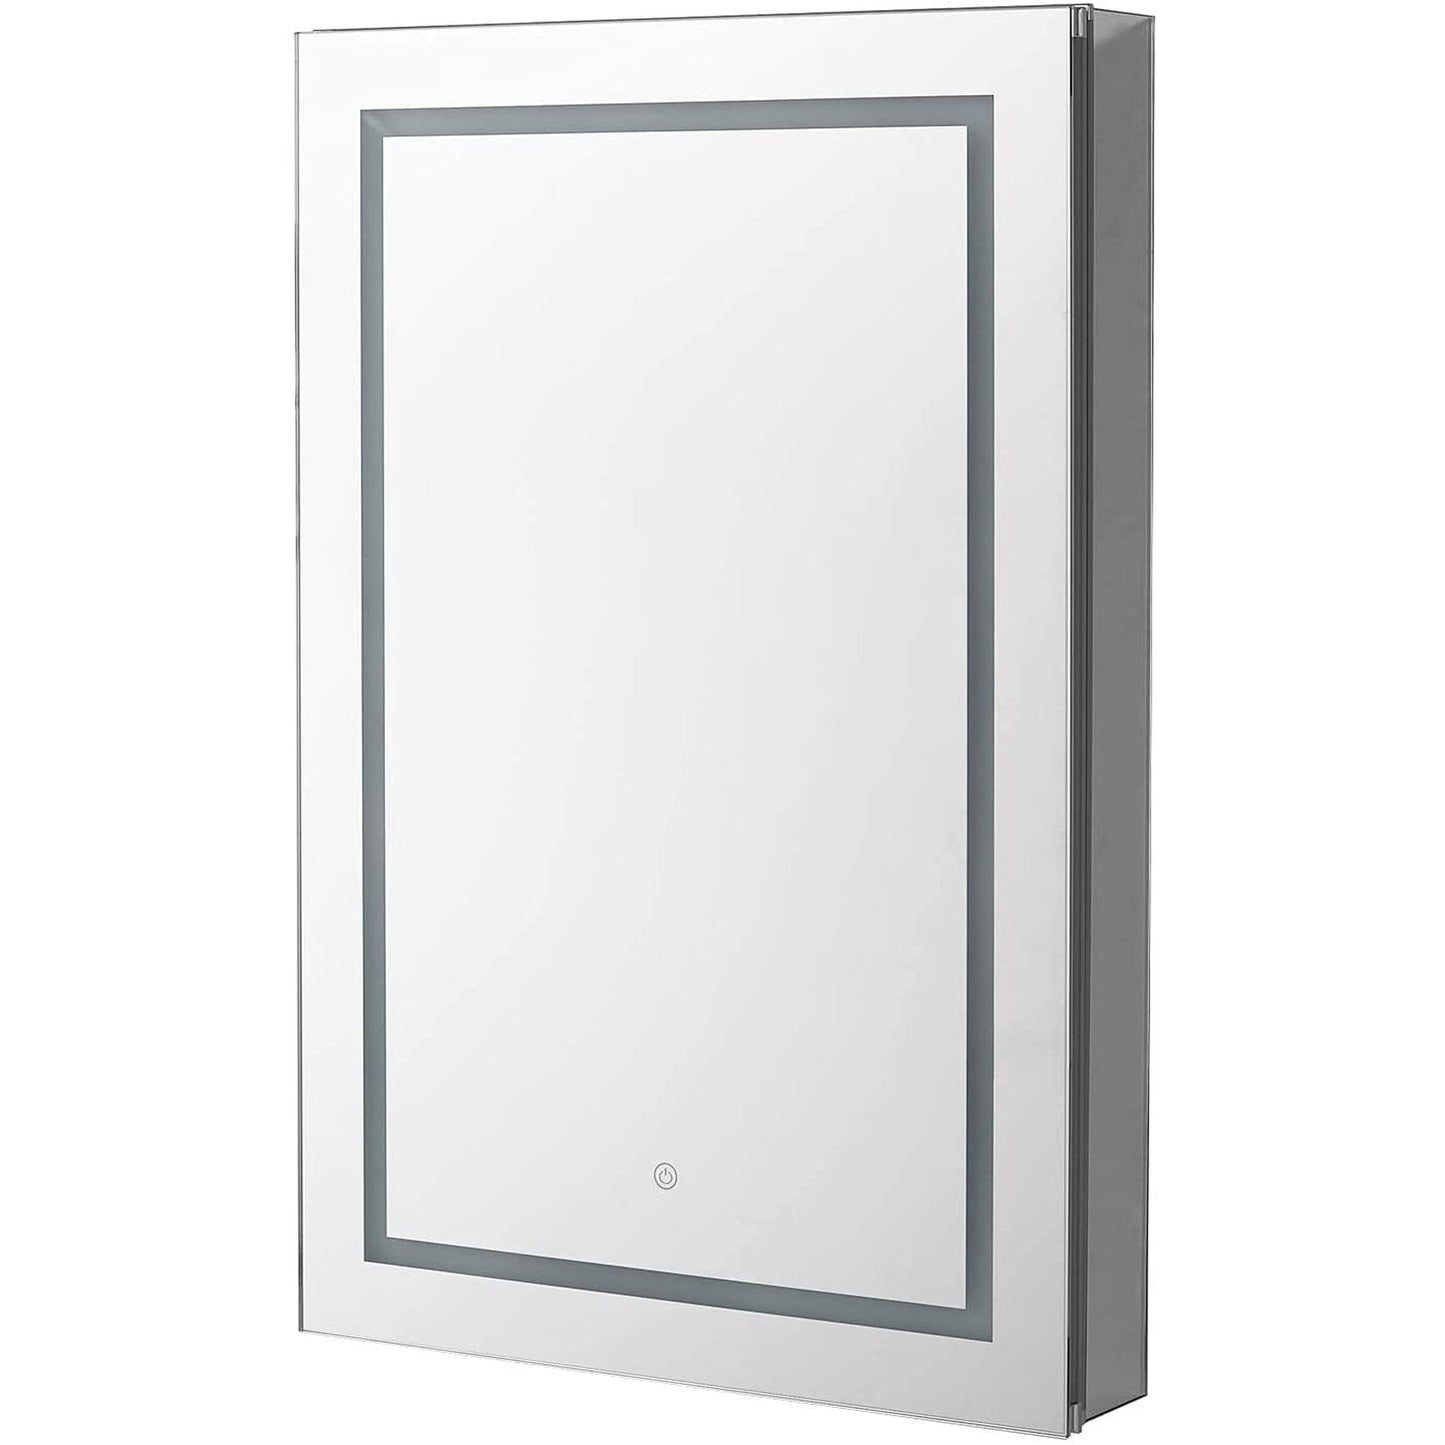 Aquadom Royale Plus 24" x 36" Rectangle Recessed or Surface Mount Single View Left Hinged LED Lighted Bathroom Medicine Cabinet With Defogger, Electrical Outlet, Magnifying Mirror